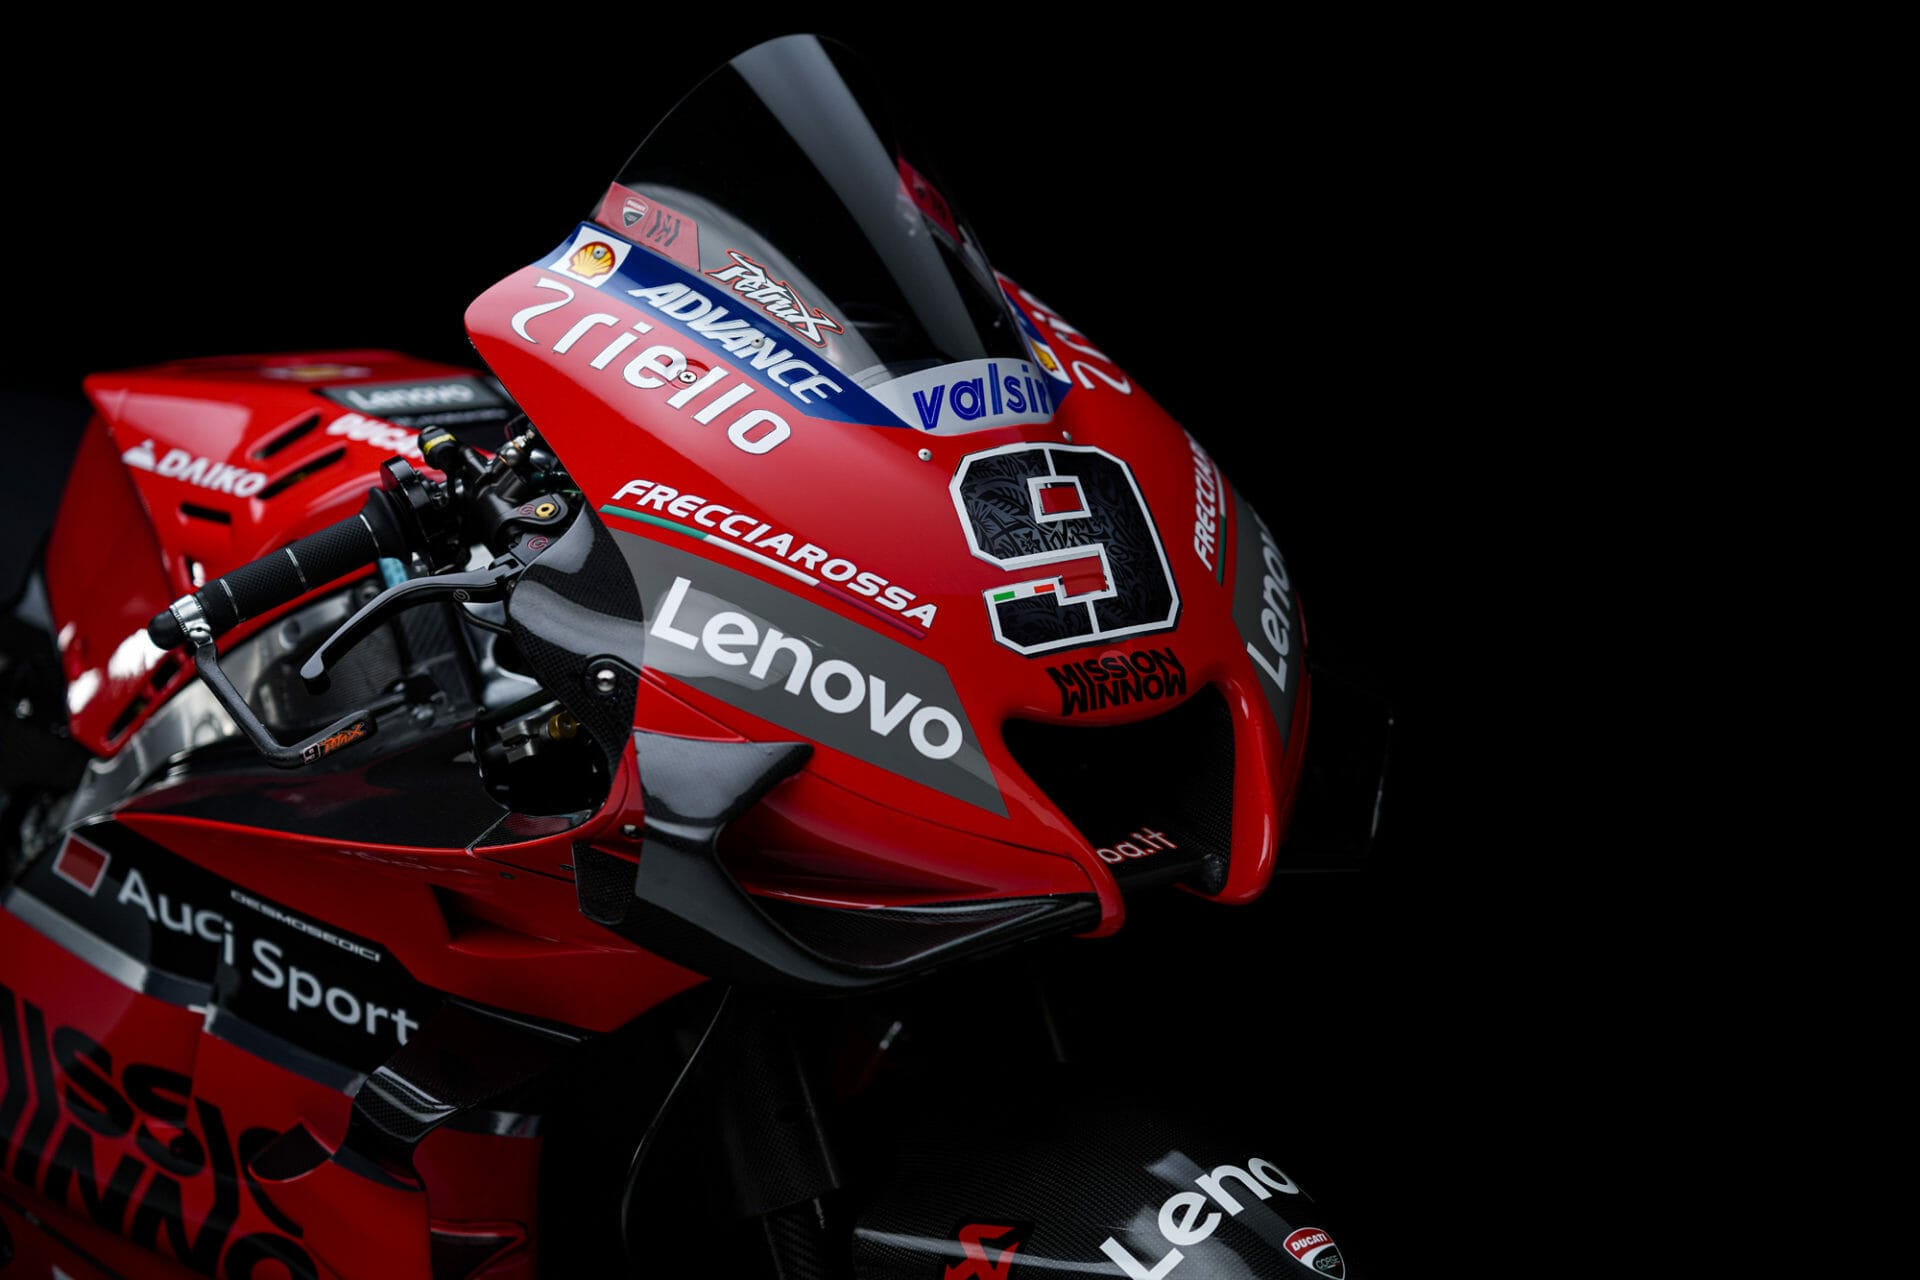 #Ducati presented the MotoGP team for 2020
- also in the APP MOTORCYCLE NEWS